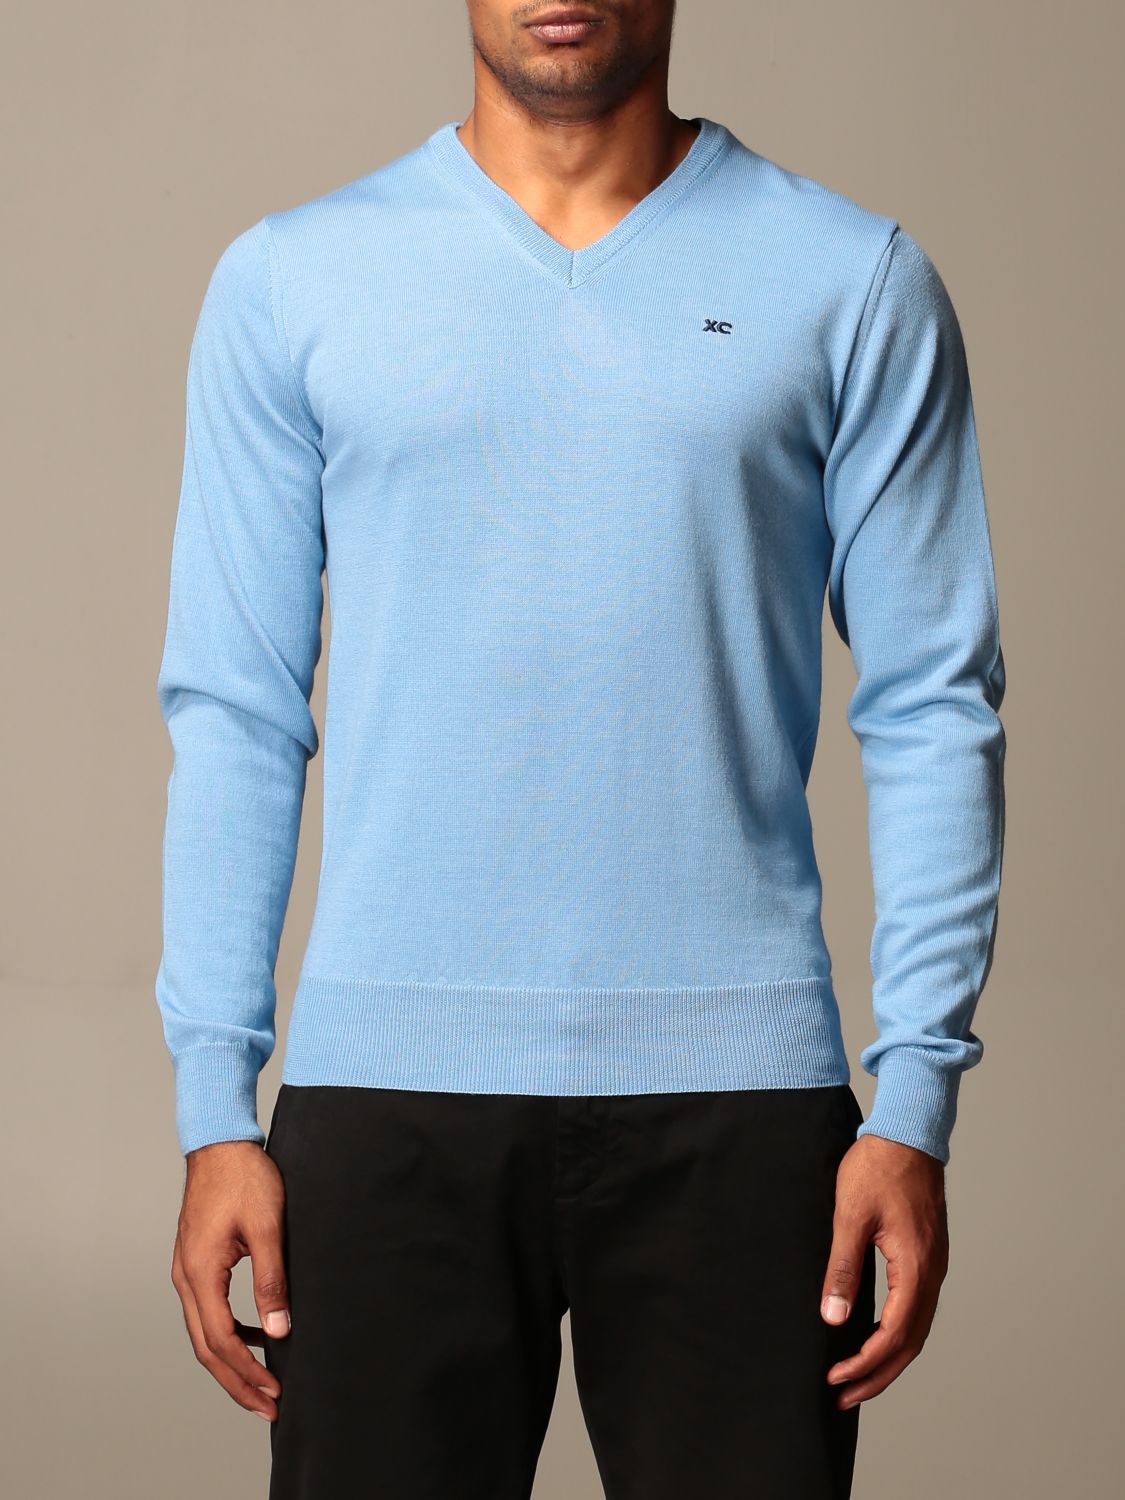 Xc Outlet: V-neck sweater in extrafine Merino wool - Sky Blue | Xc ...